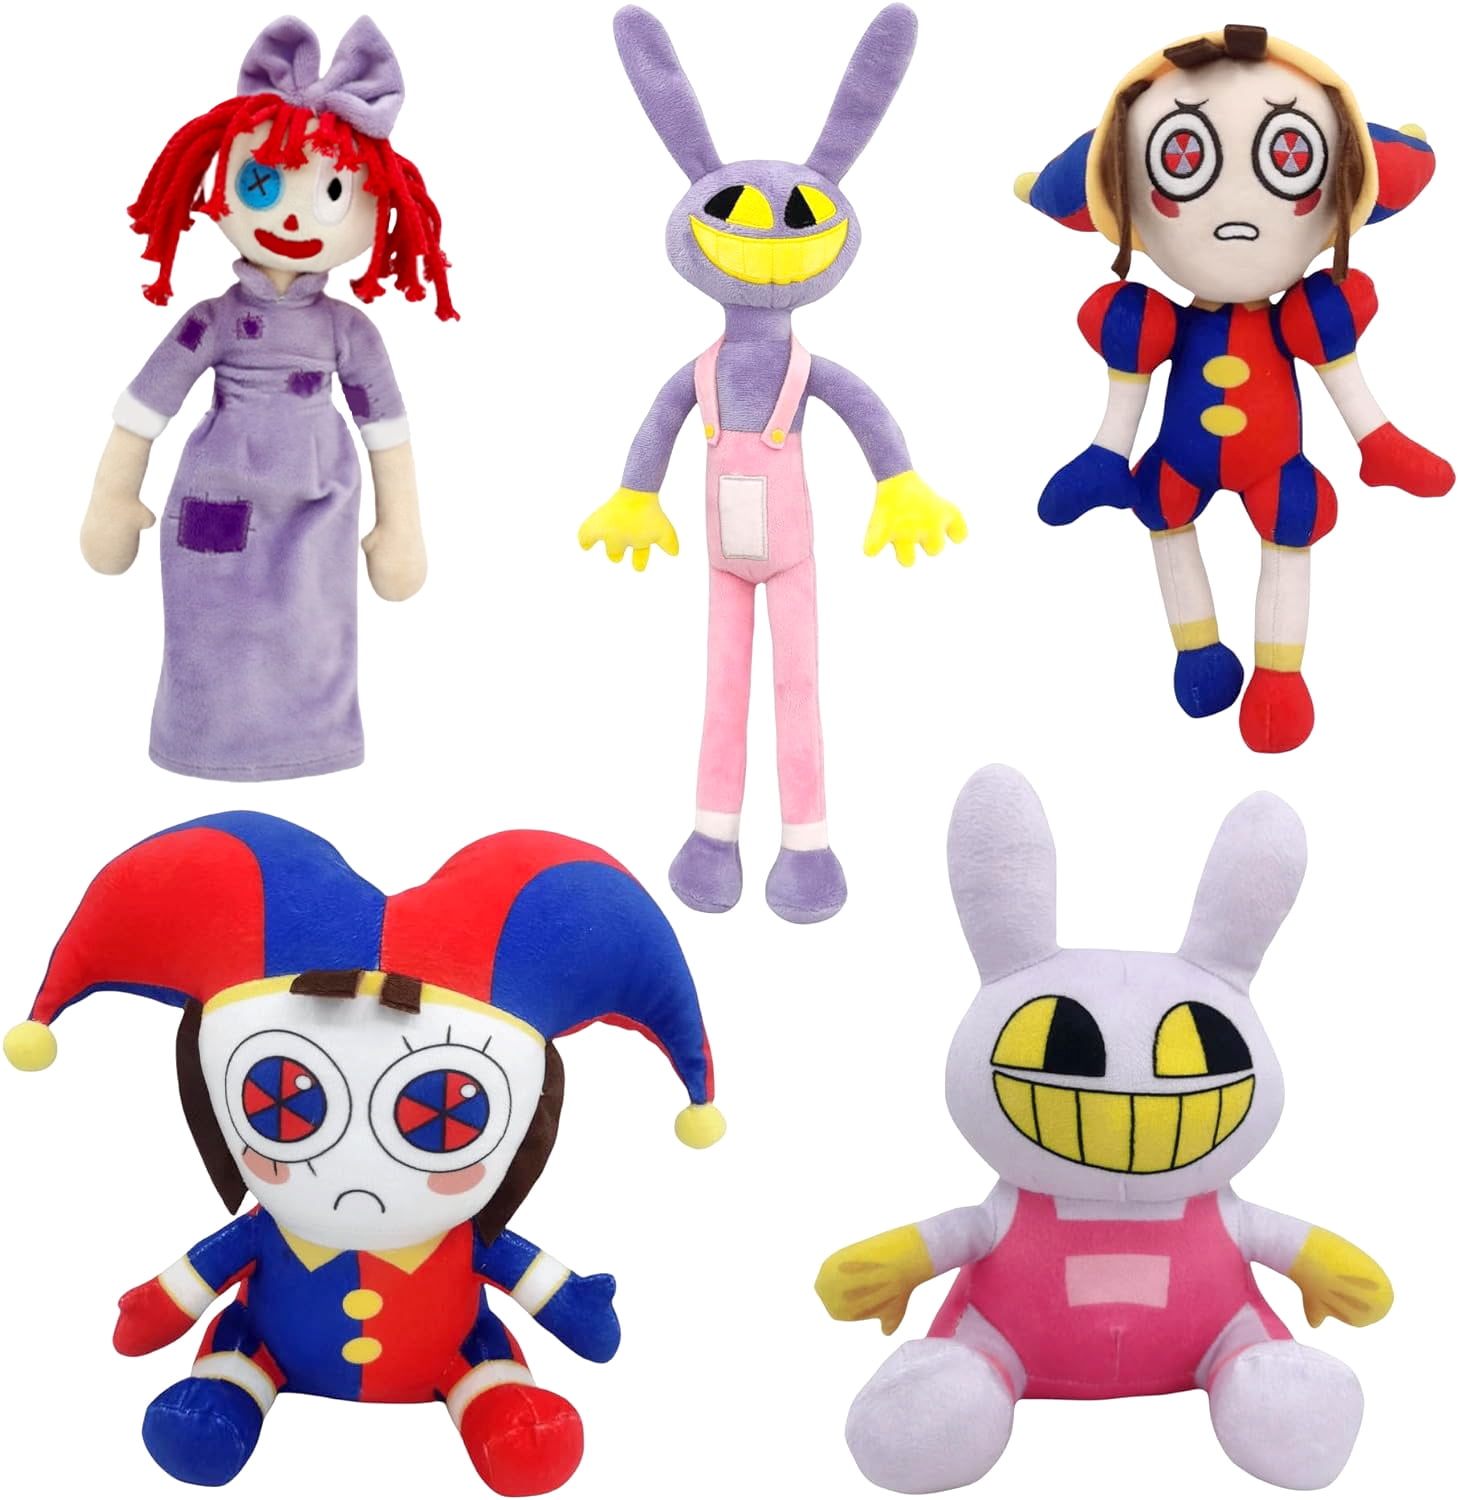 The Amazing Digital Circus Plush Toys, Pomni&Jax Plushies Toy for TV Fans  Gift, Cute Stuffed Figure Pomni Jax Doll for Kids and Adults Birthday  Christmas Gift(5 pcs) 